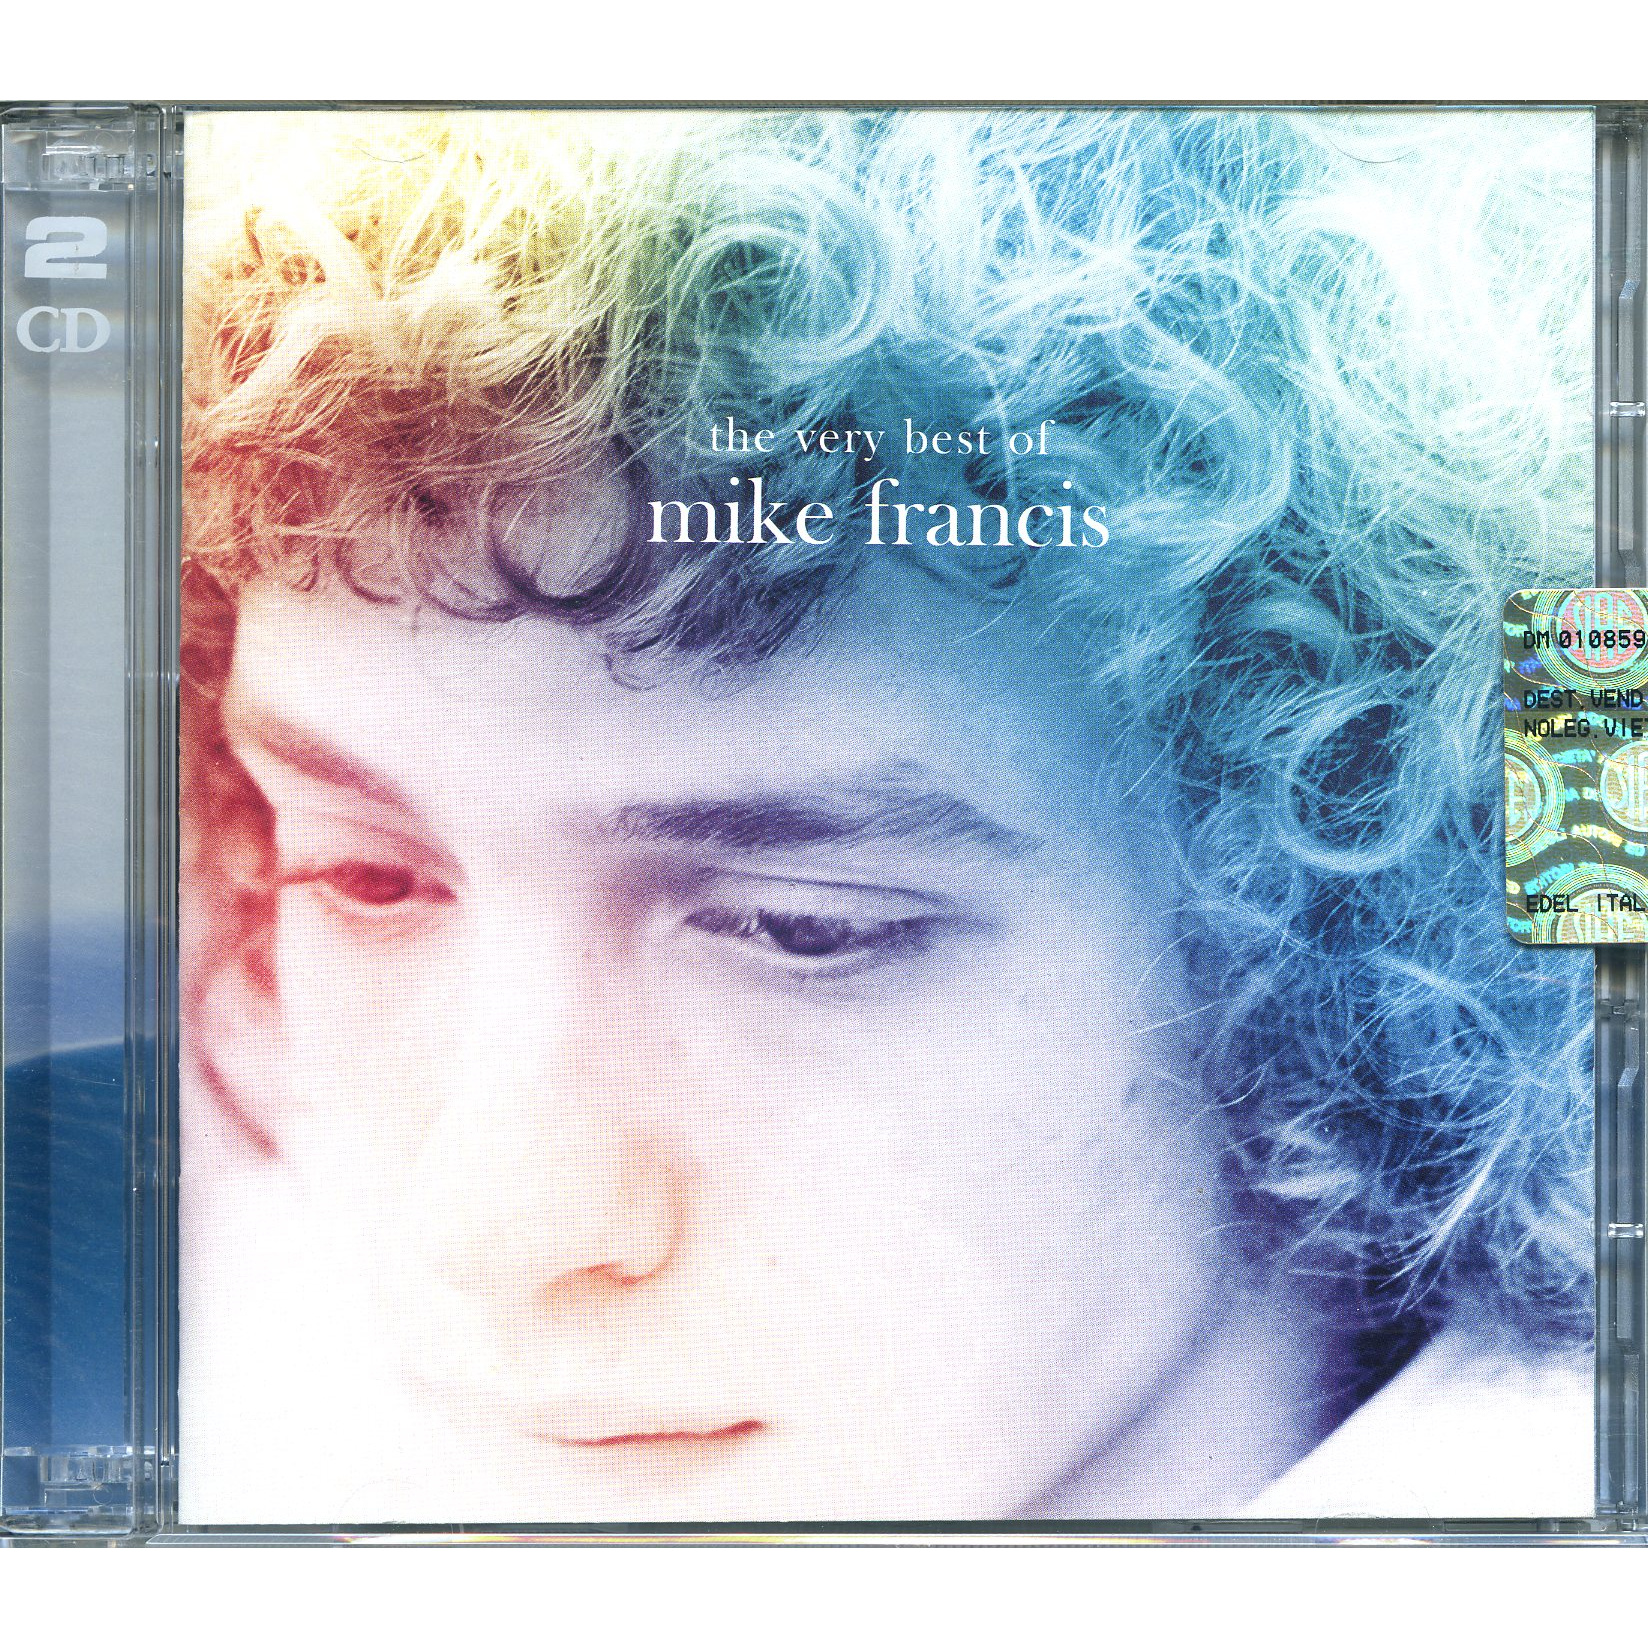 THE VERY BEST OF MIKE FRANCIS